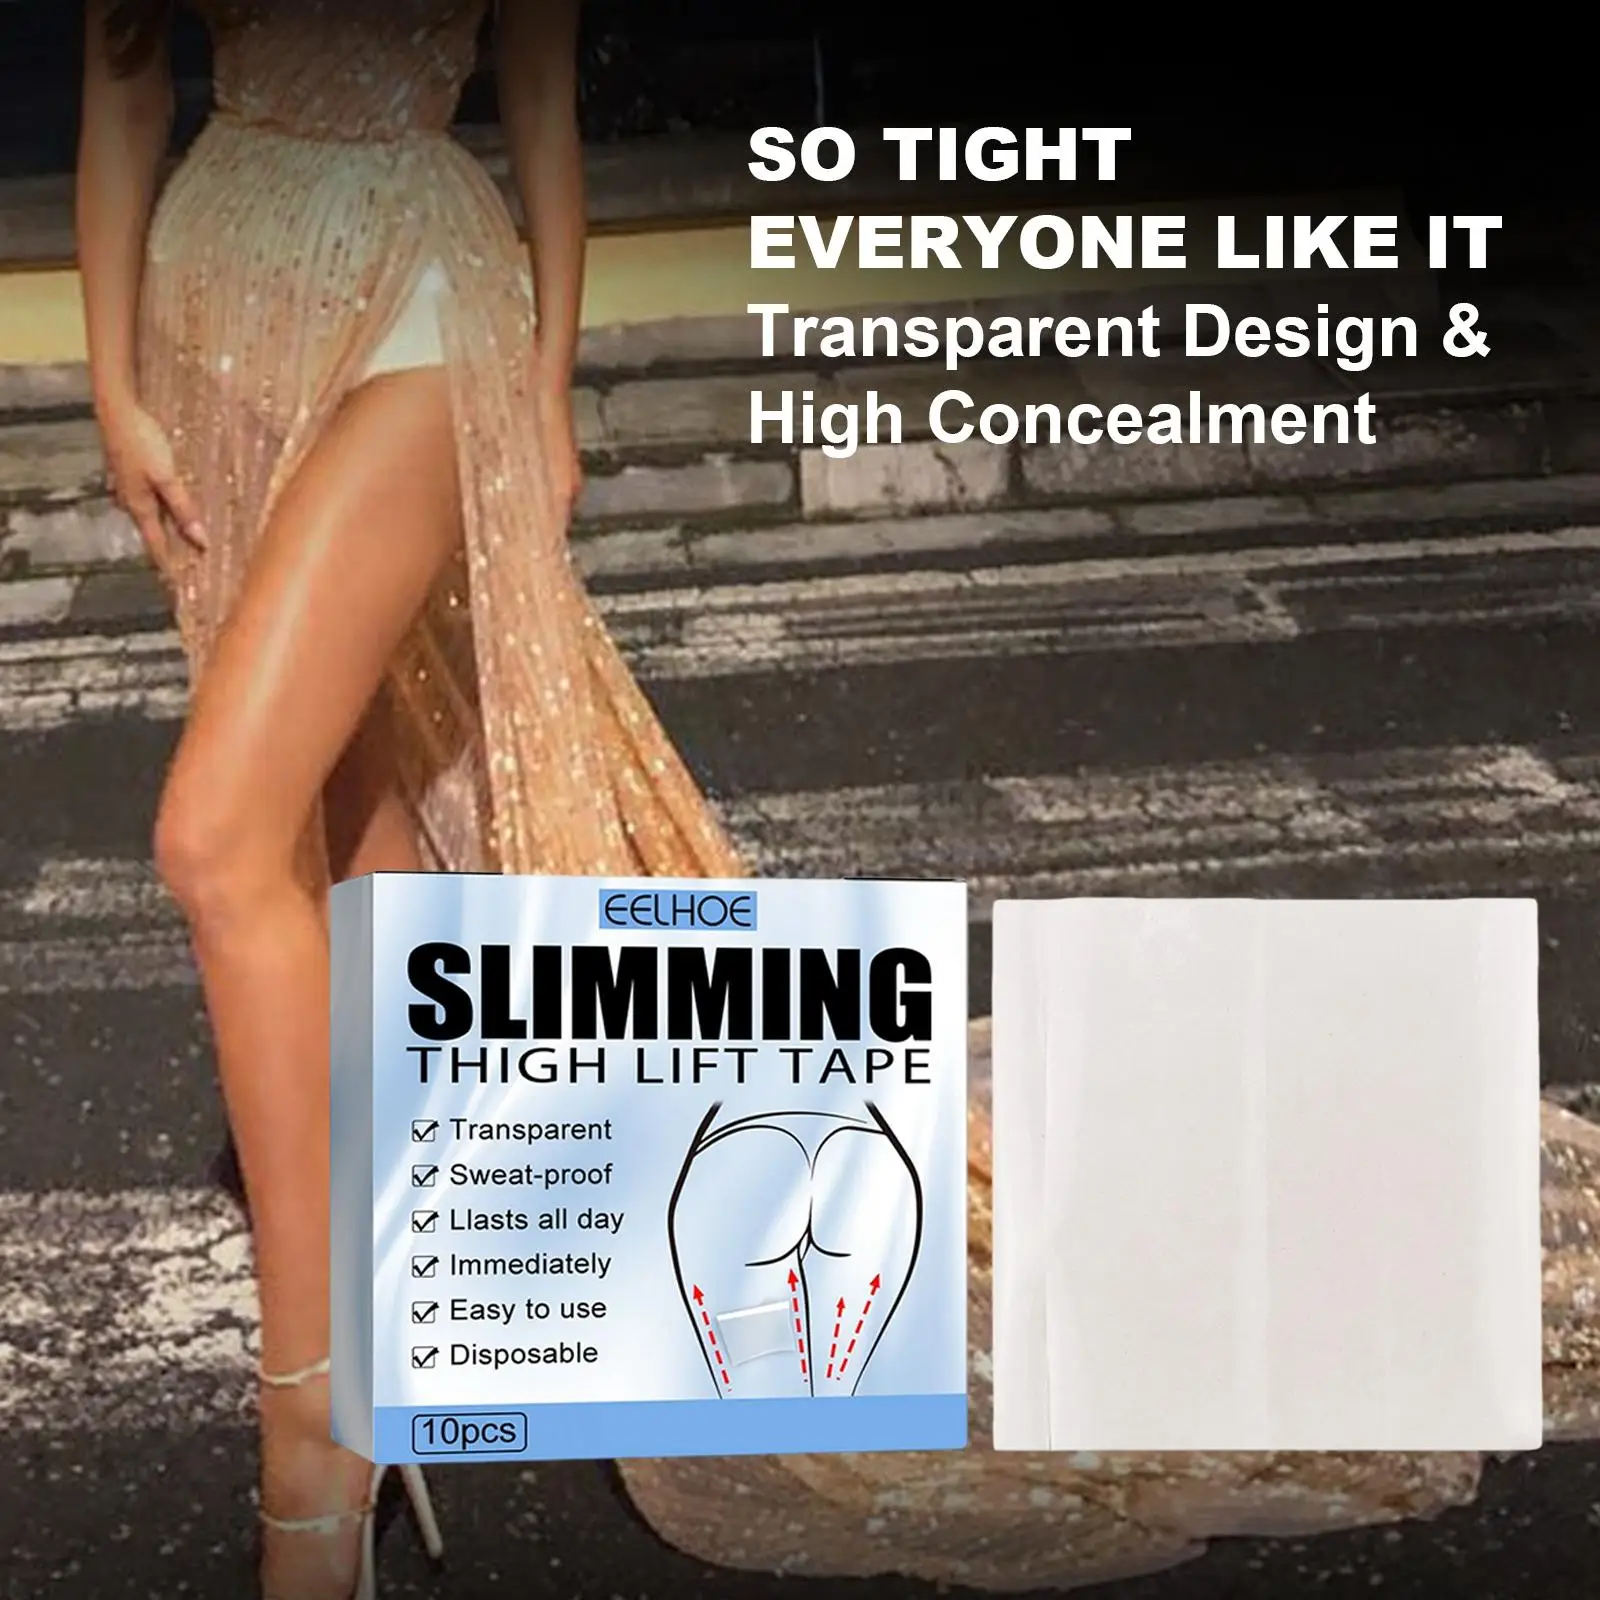 10x Thigh Lift Tape Sweatproof Instantly Lift Transparent Sticker Paste Lifts Cellulite & Sagging Skin On Thighs Tight Firm Legs